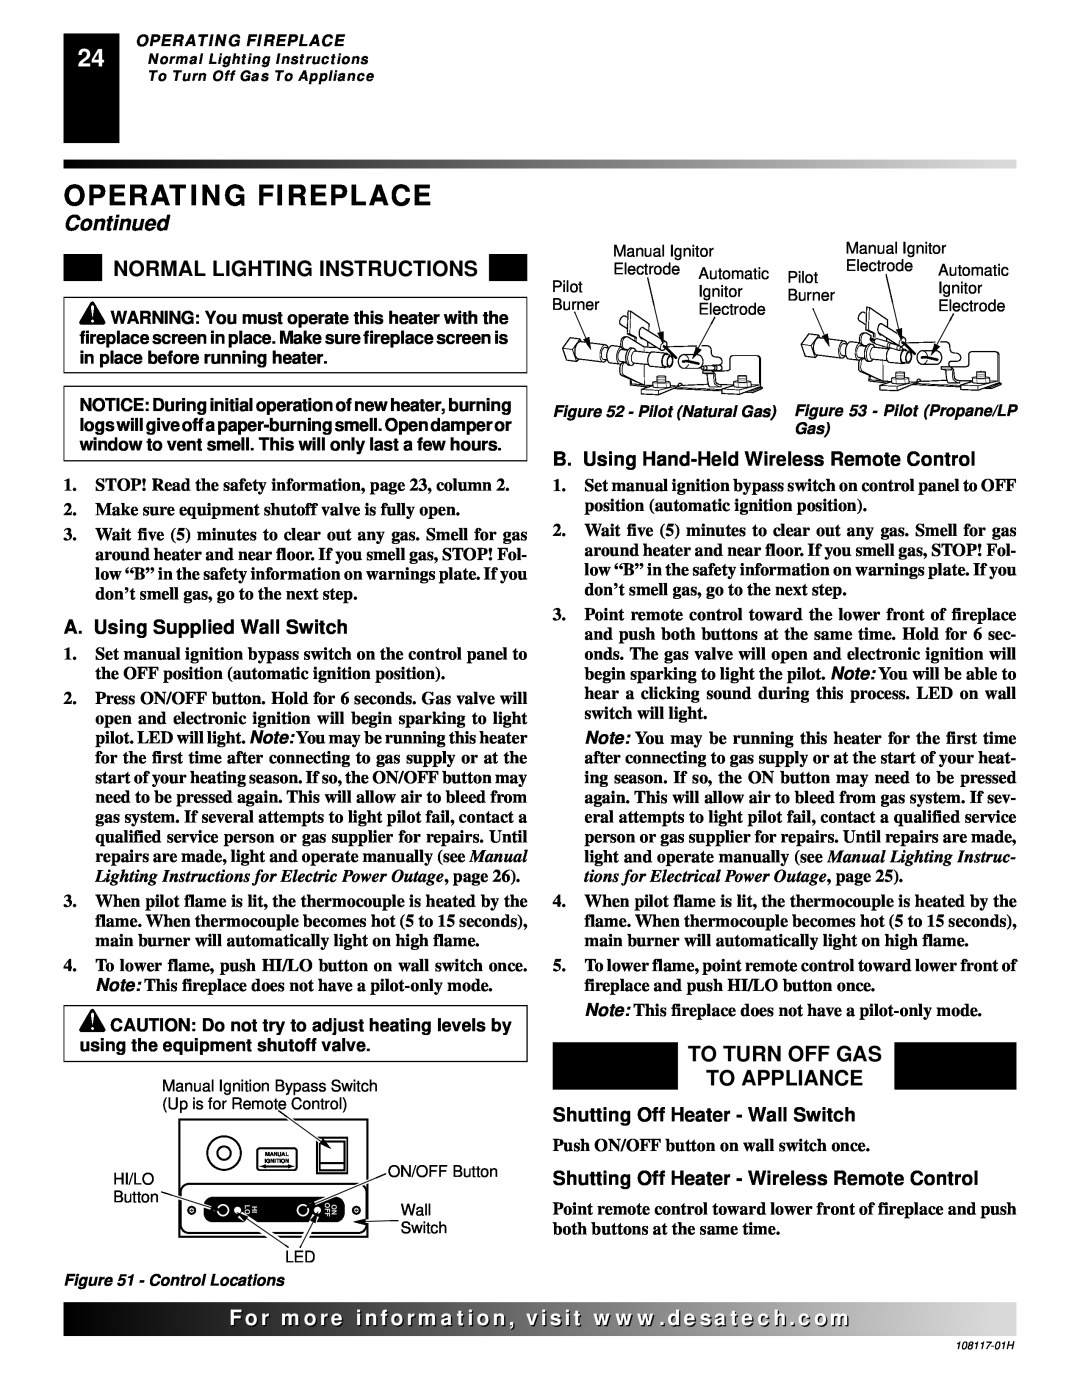 Desa EFP33NR, EFP33PR Normal Lighting Instructions, To Turn Off Gas To Appliance, Operating Fireplace, Continued 